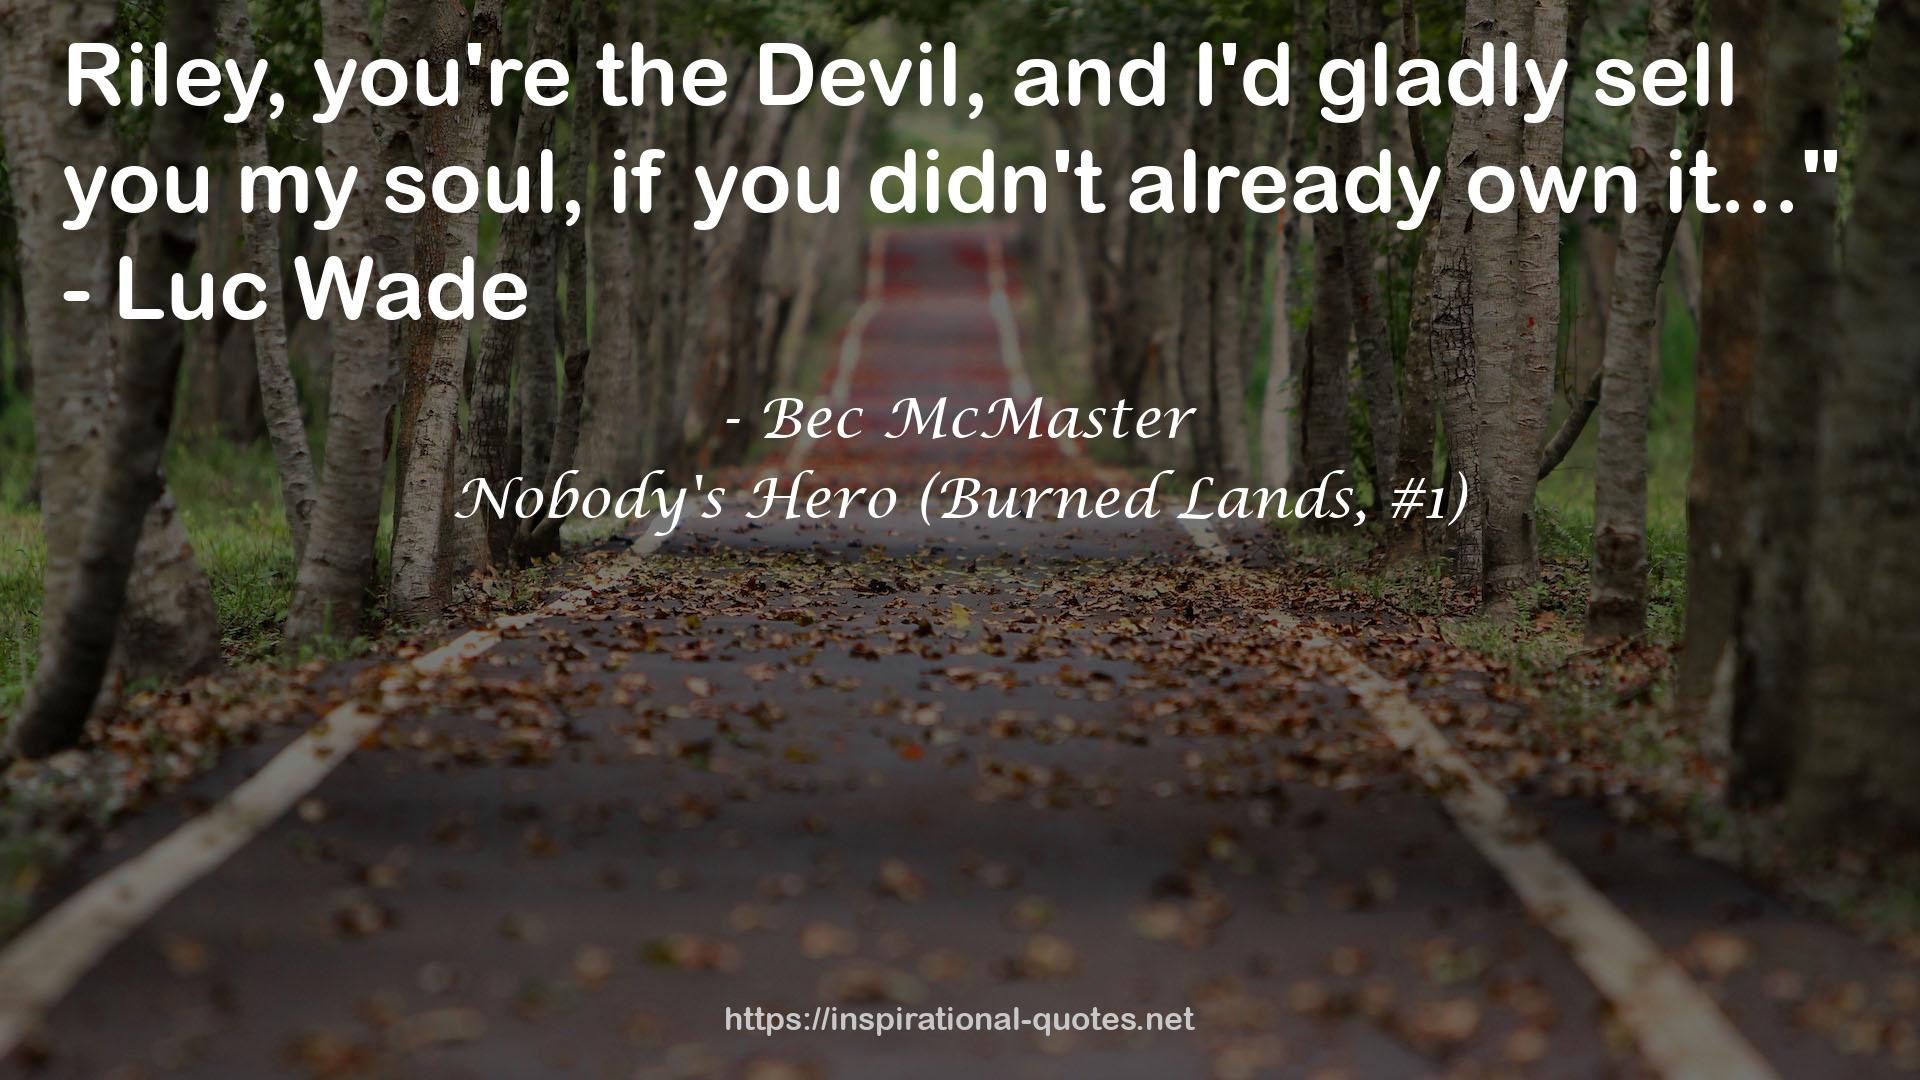 Nobody's Hero (Burned Lands, #1) QUOTES